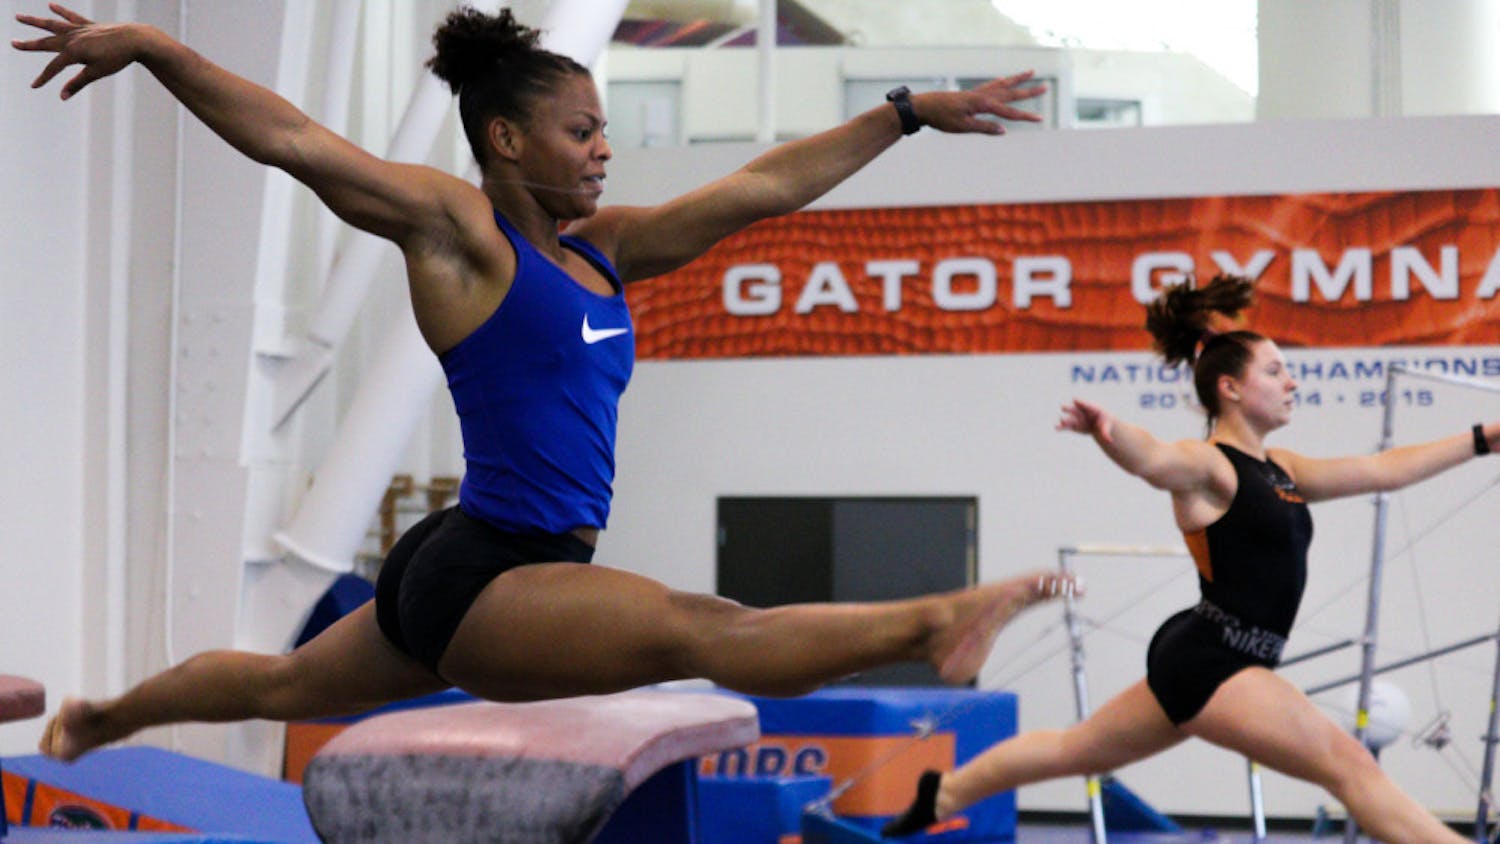 Trinity Thomas scored a perfect 10 on her floor routine, leading Florida to a narrow victory over LSU Friday night